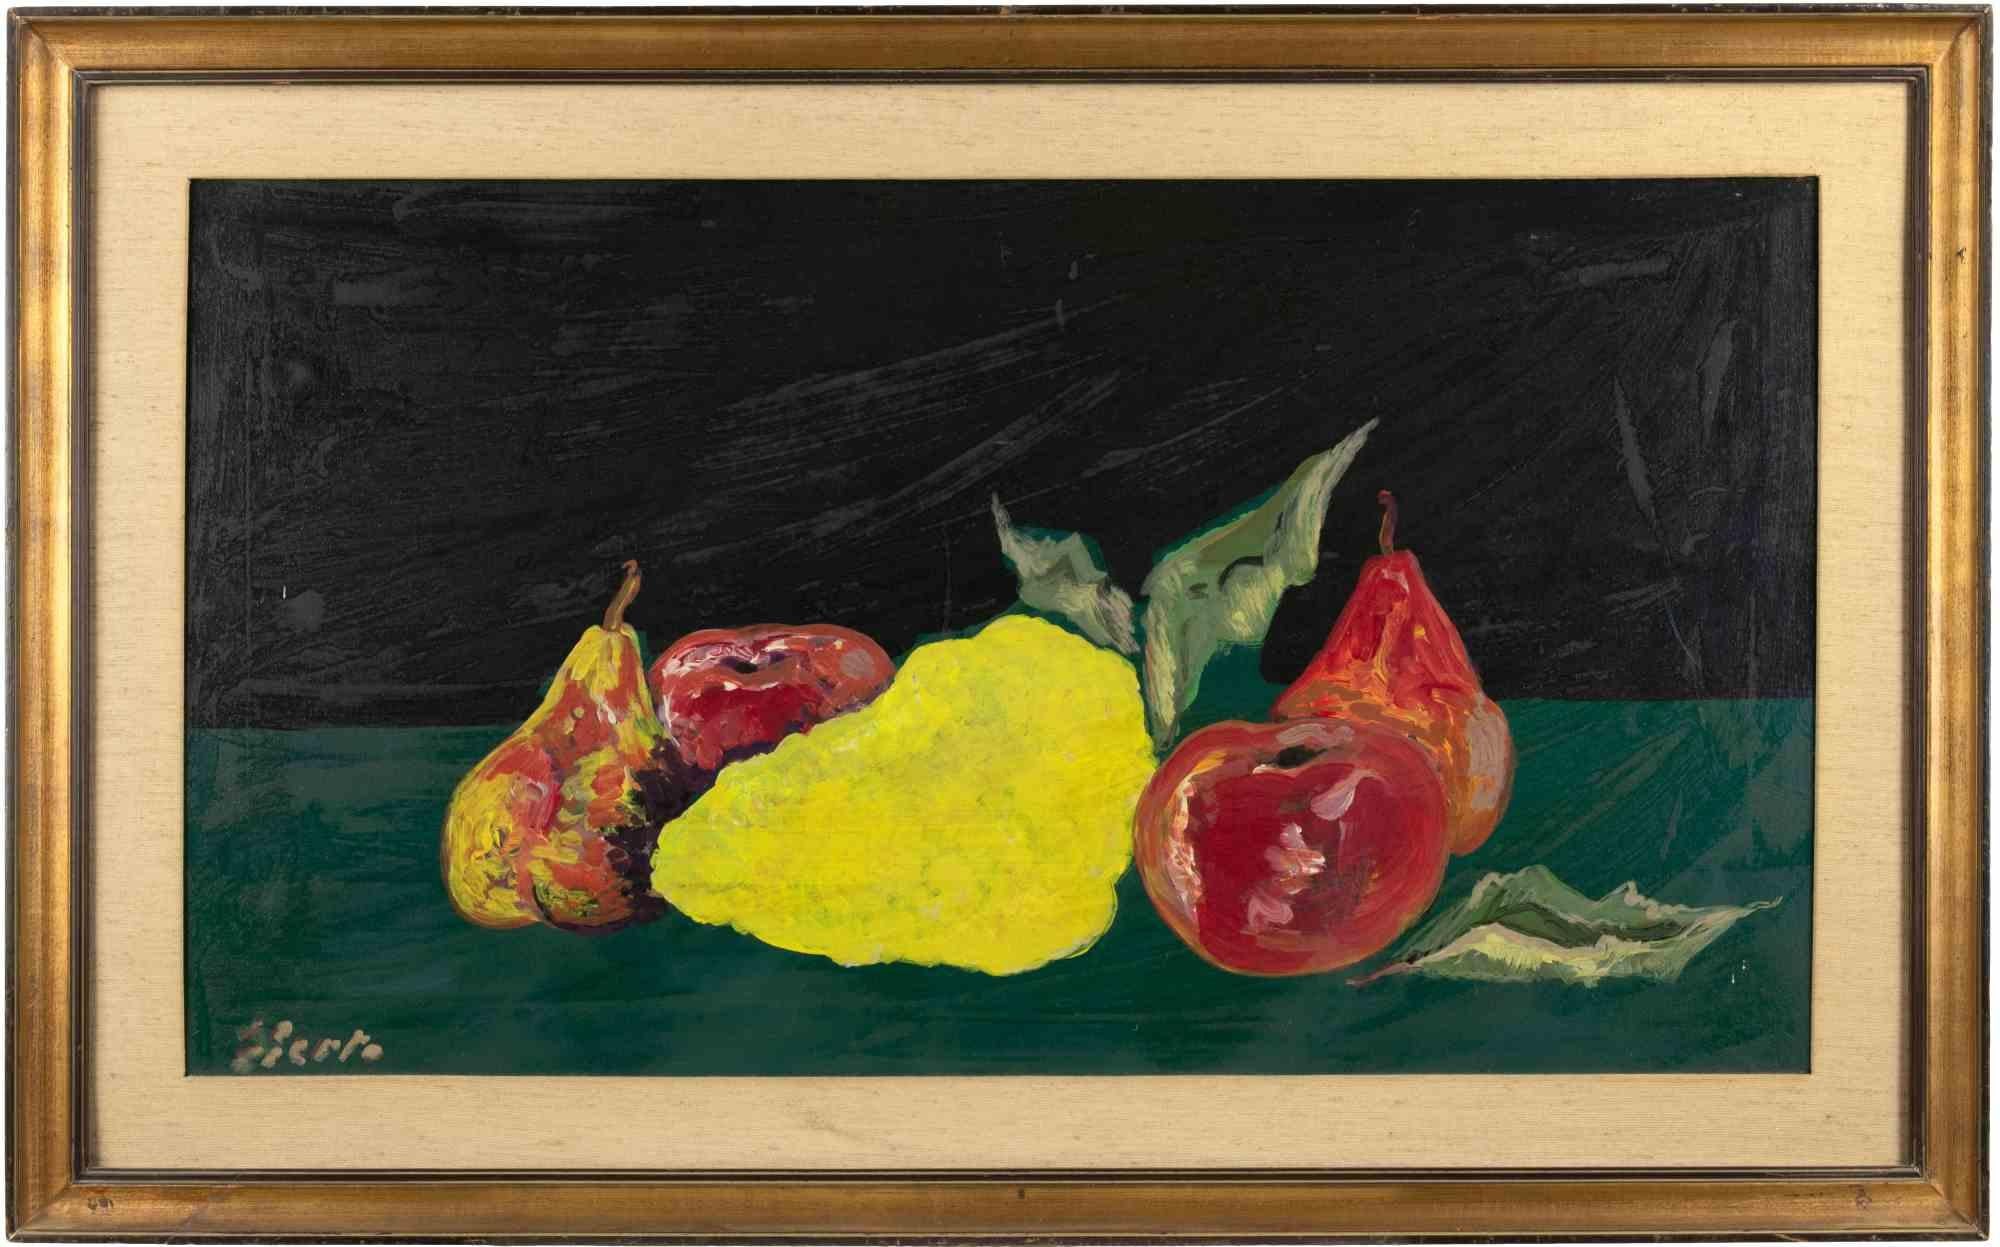 Fruits is a modern artwork realized by the artist Gian Paolo Berto in 1967.

Mixed colored oil painting.

Hand signed on the lower margin.

Signature, title and date on the back

Includes frame.